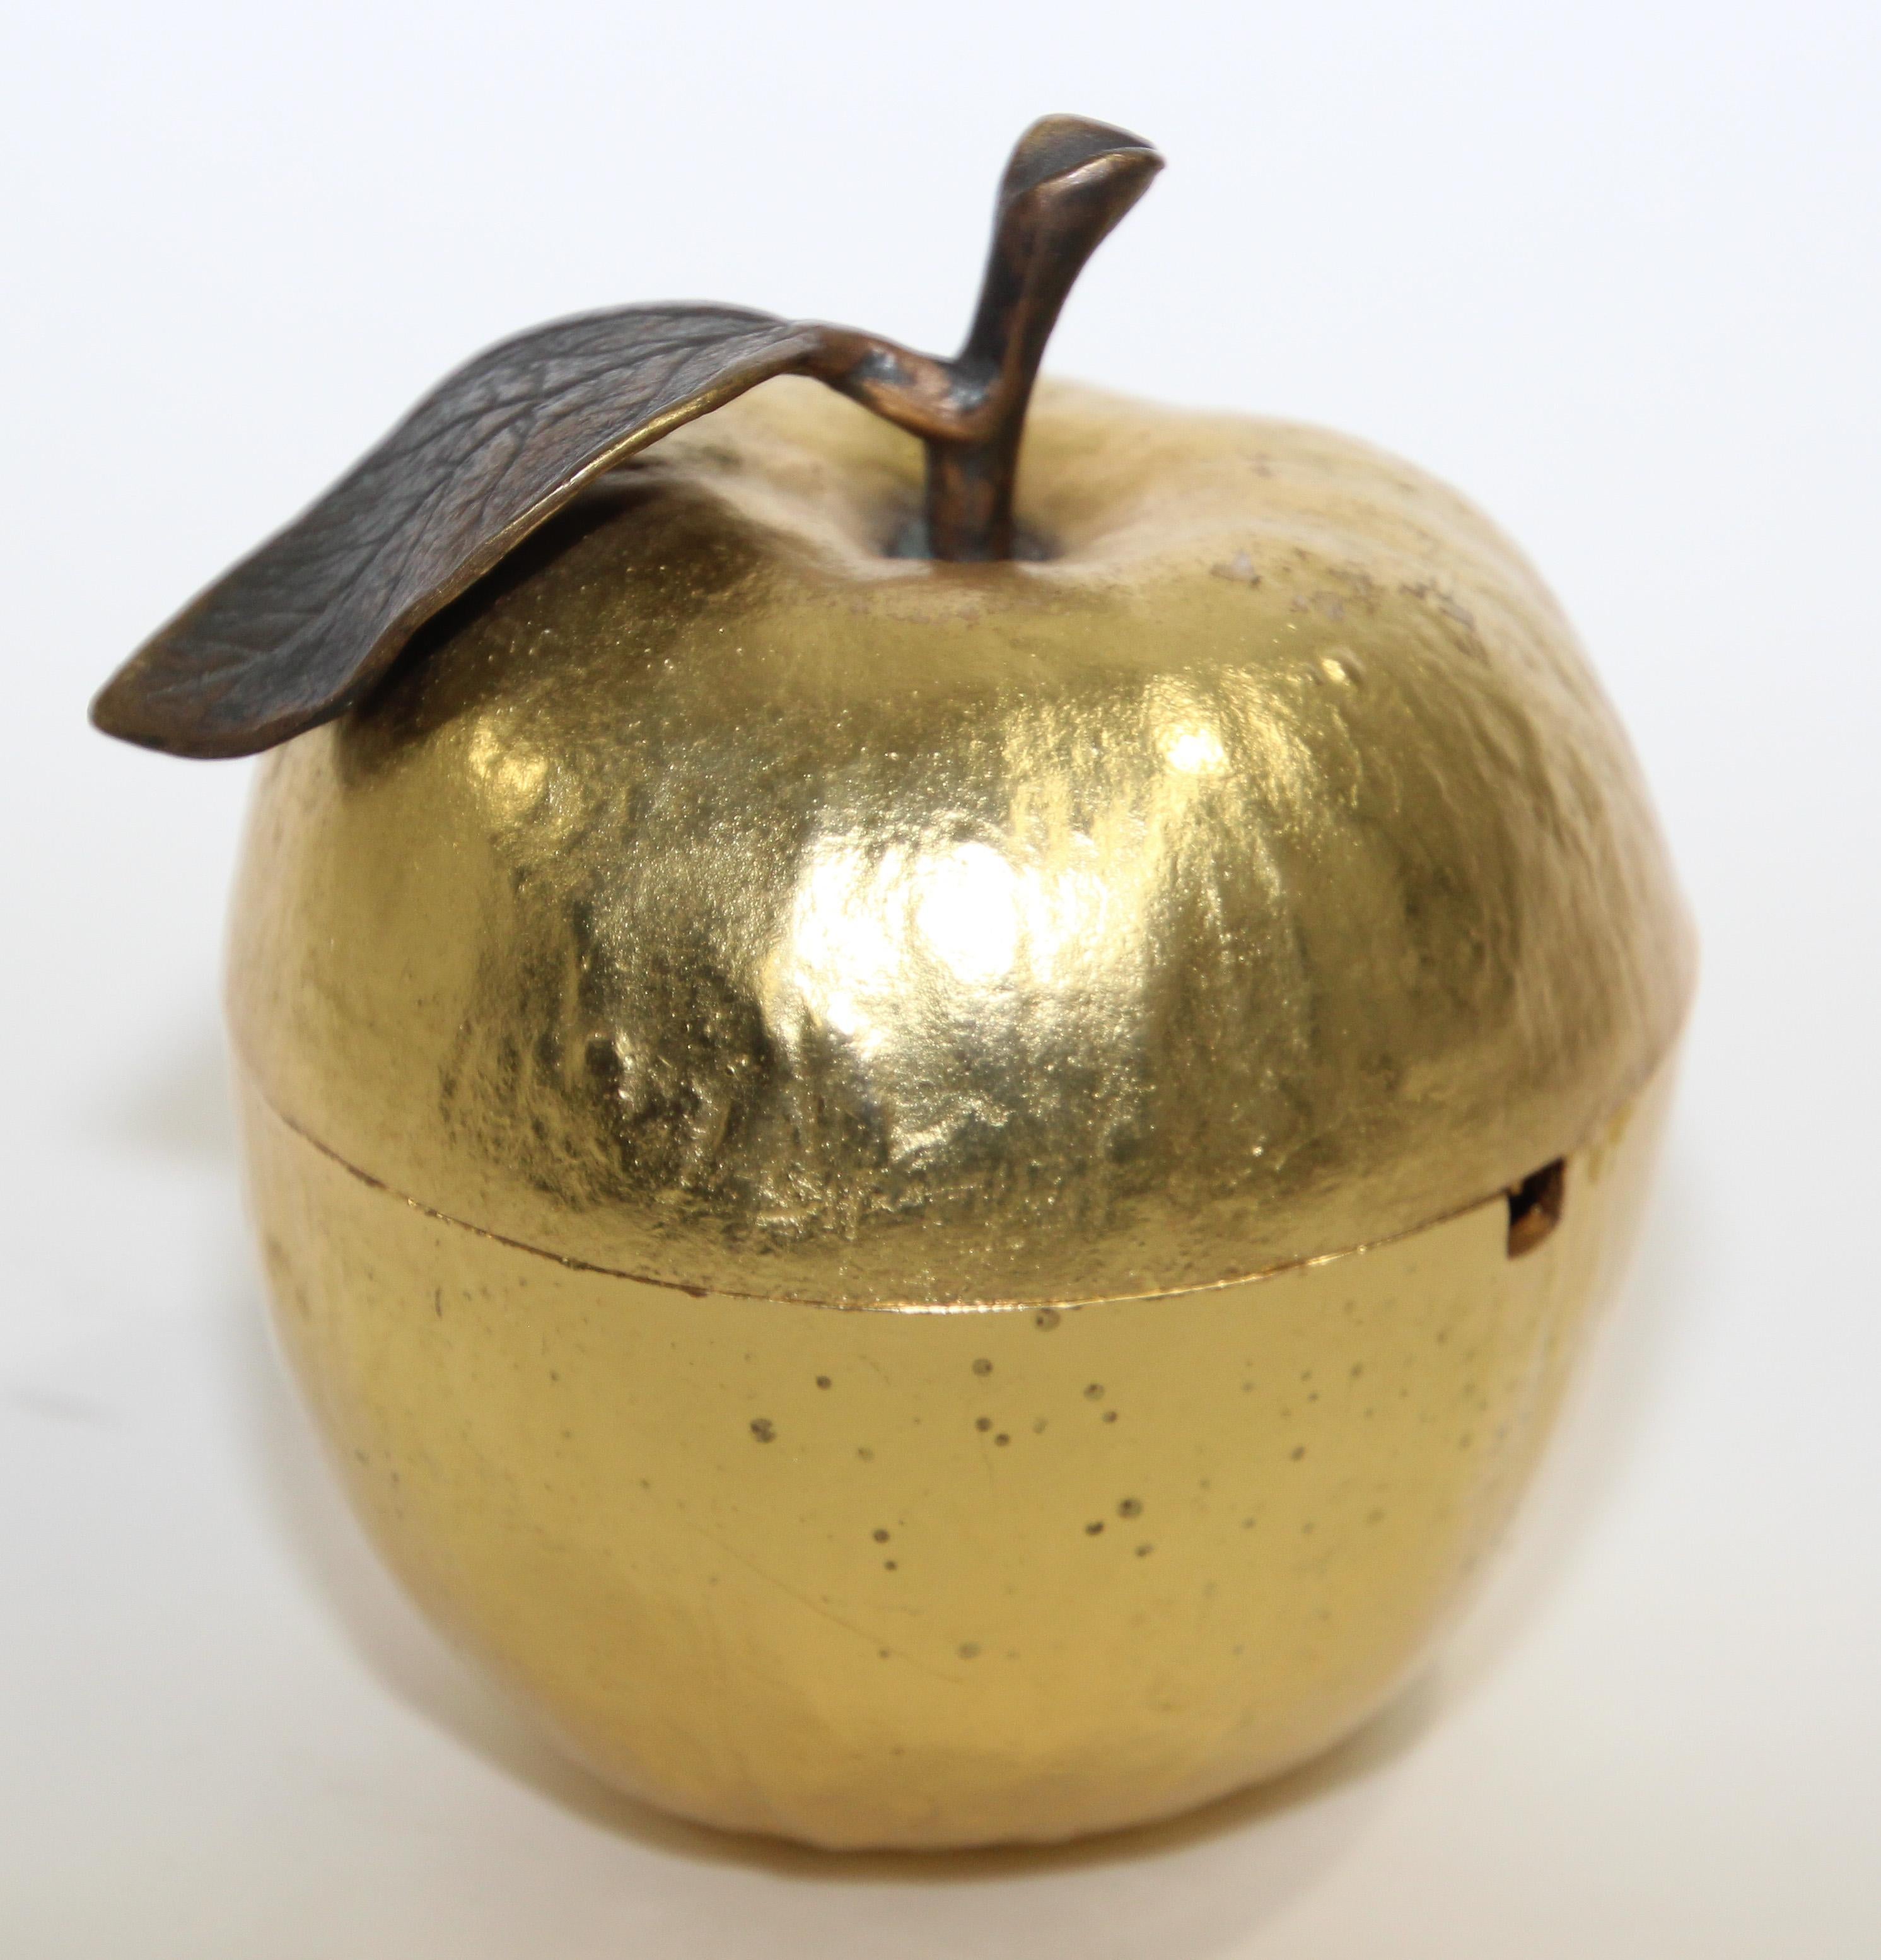 Gold-plated apple honey pot from Michael Aram.
Great decorative apple sculpture.
This apple lidded dish is gold plated with an oxidized bronze stem and enamel pigments. 
Measuring 3 1/2